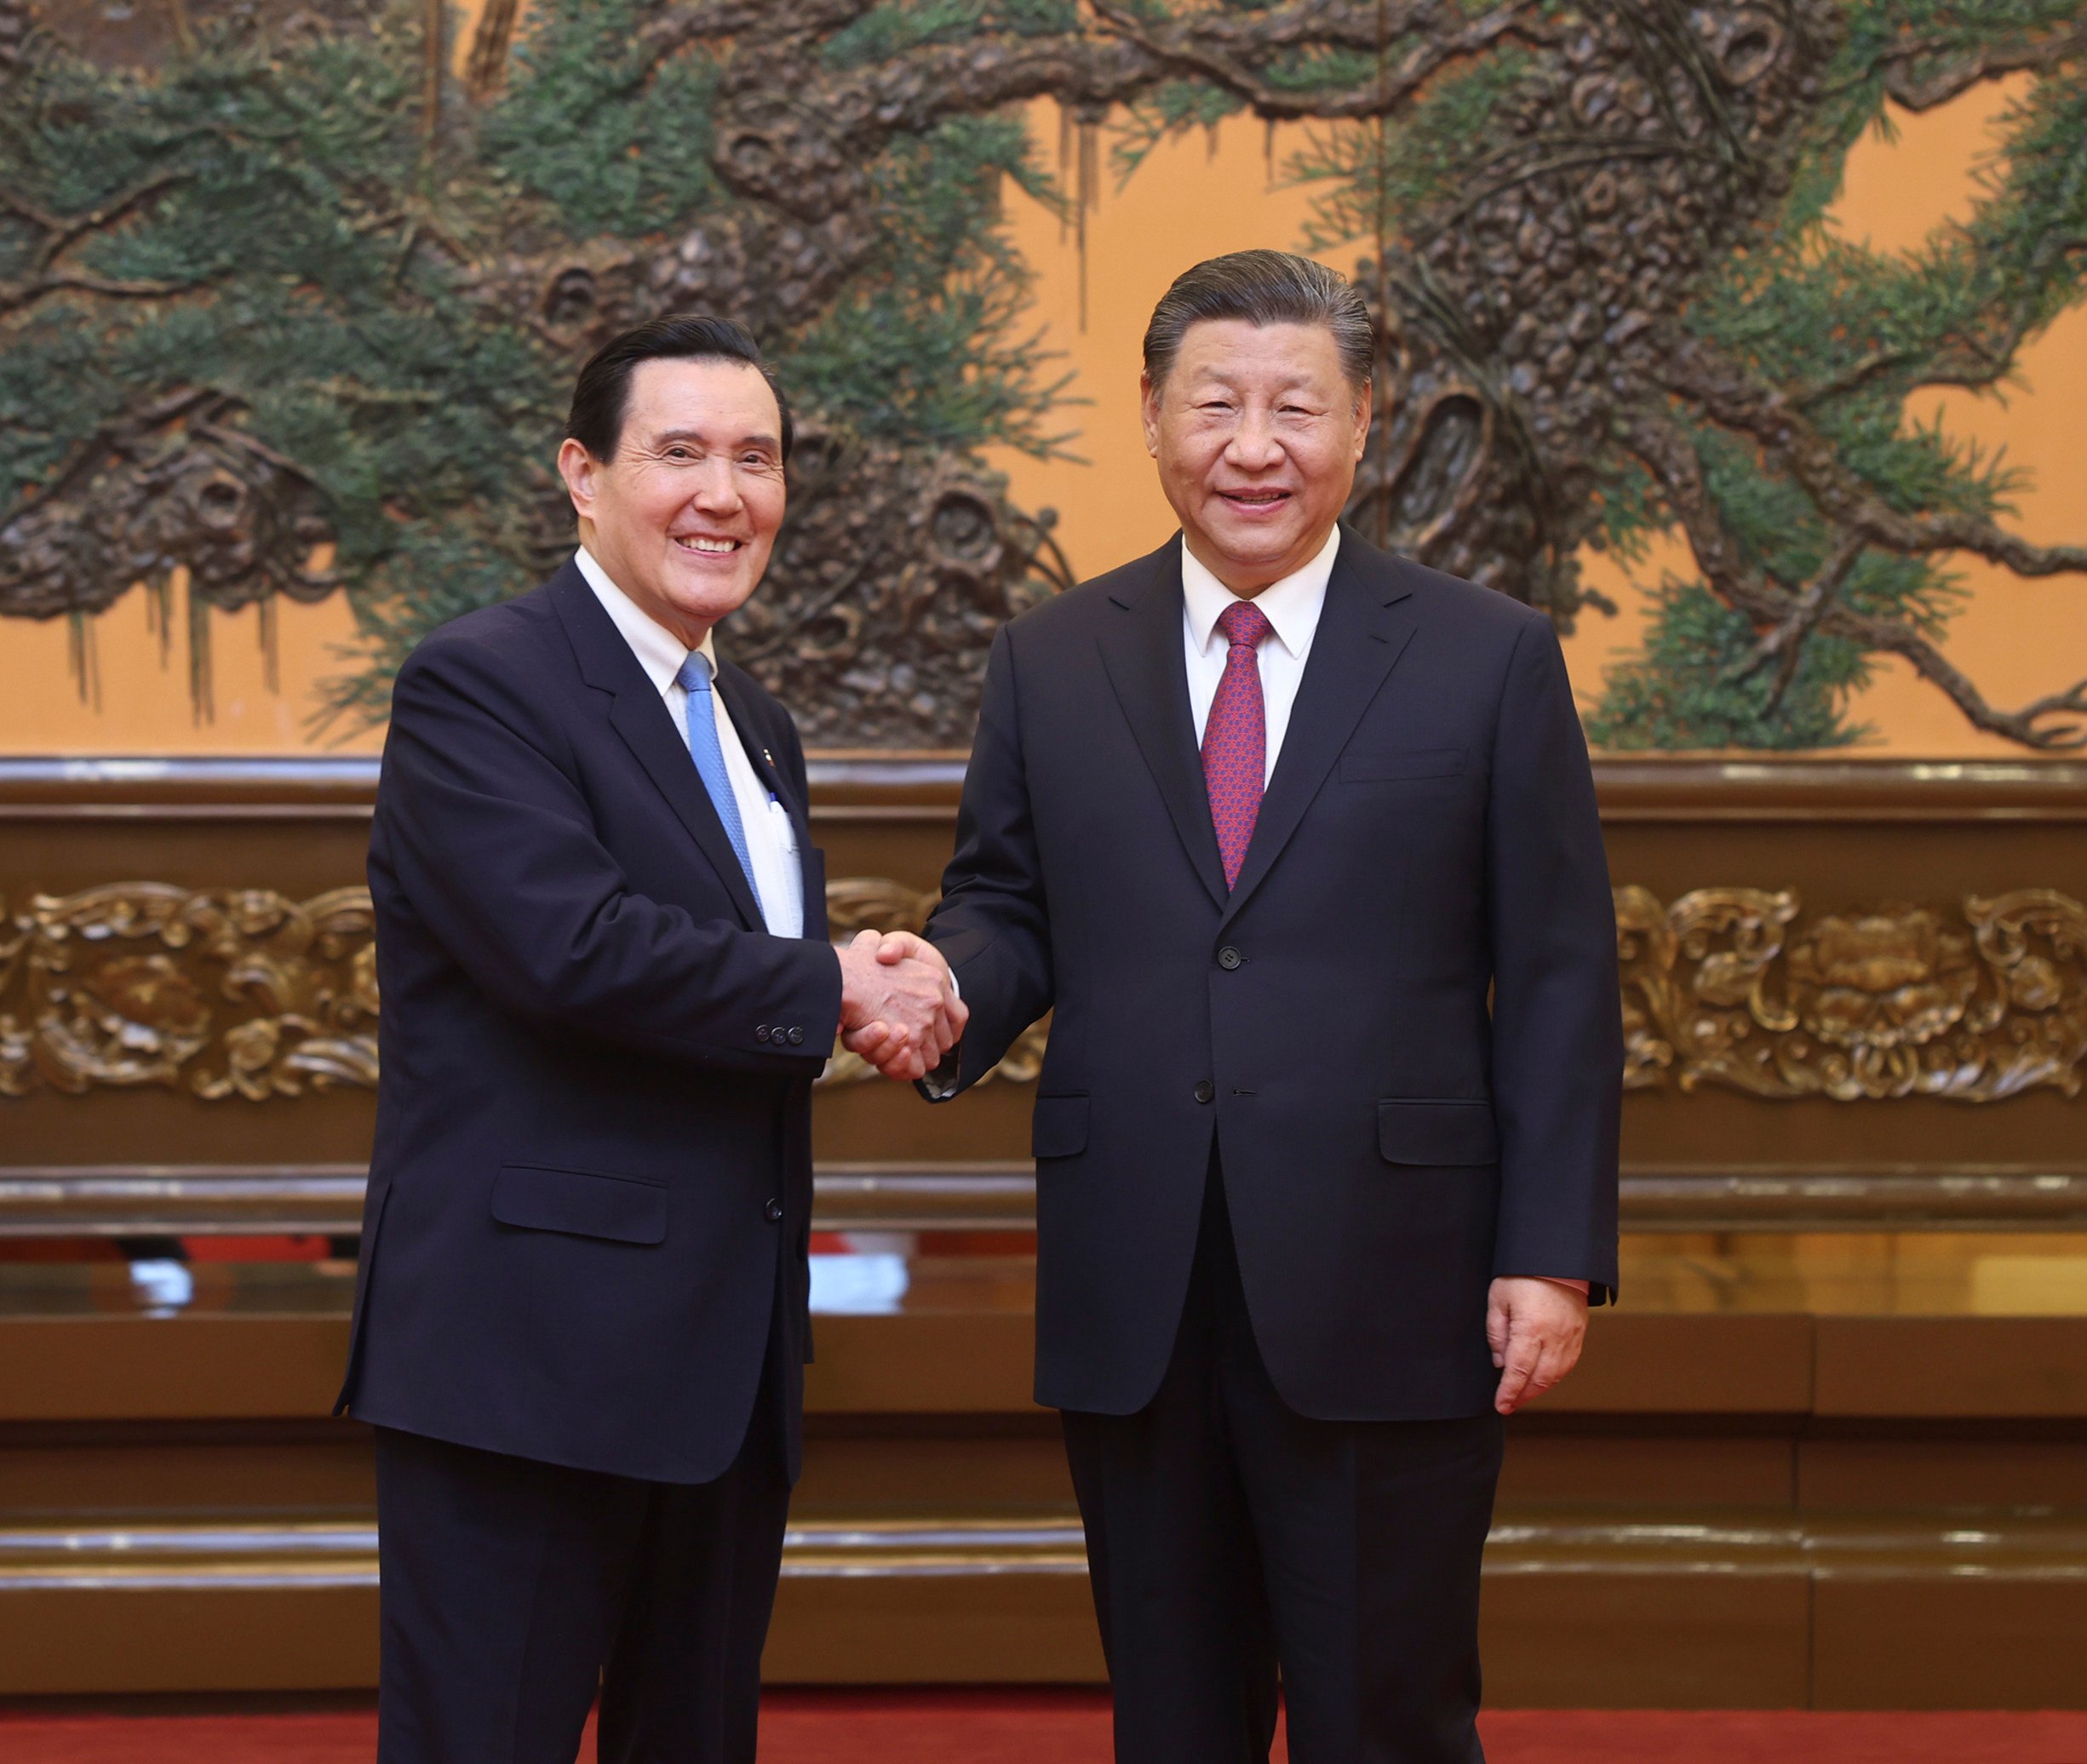 President Xi Jinping greets former Taiwanese president Ma Ying-jeou ahead of their talks in Beijing on Wednesday, nearly nine years after the pair met for a landmark summit in Singapore. Photo: Xinhua